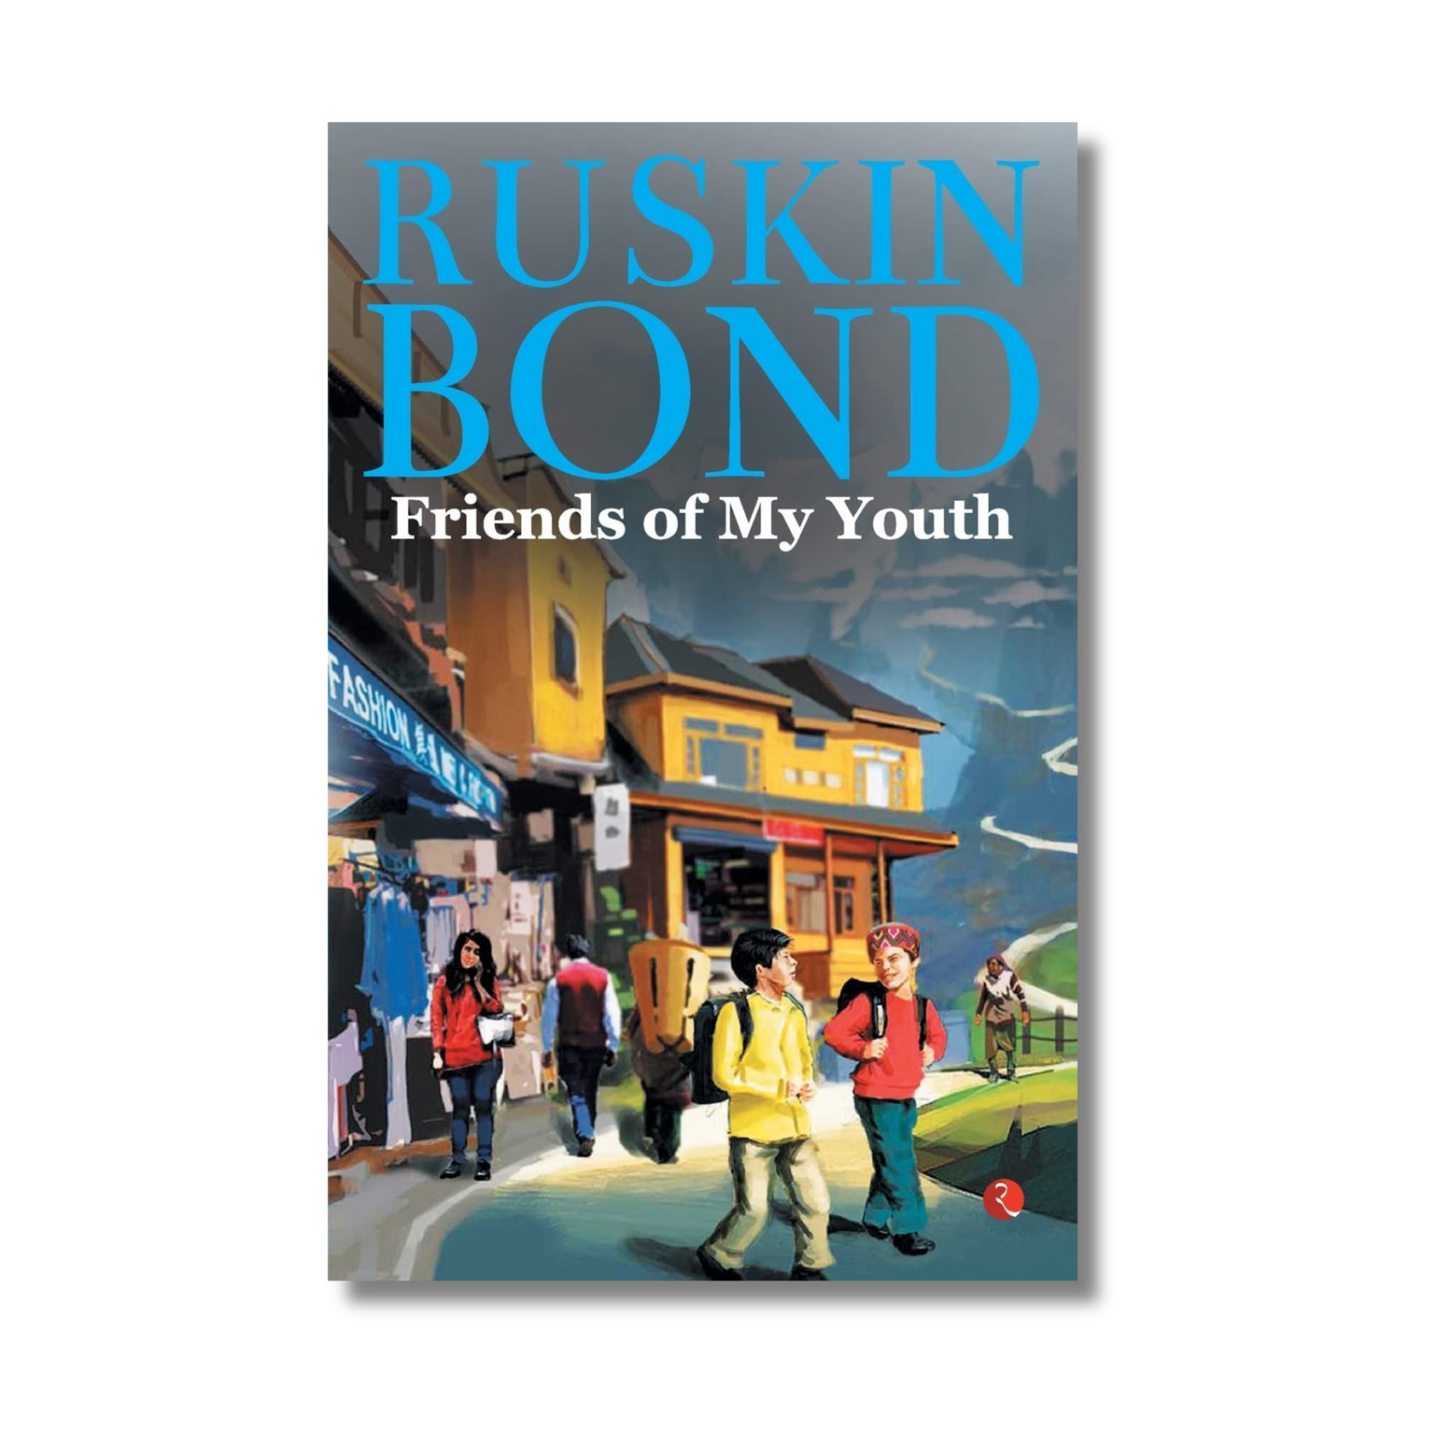 Friends of My Youth By Ruskin Bond (Paperback)